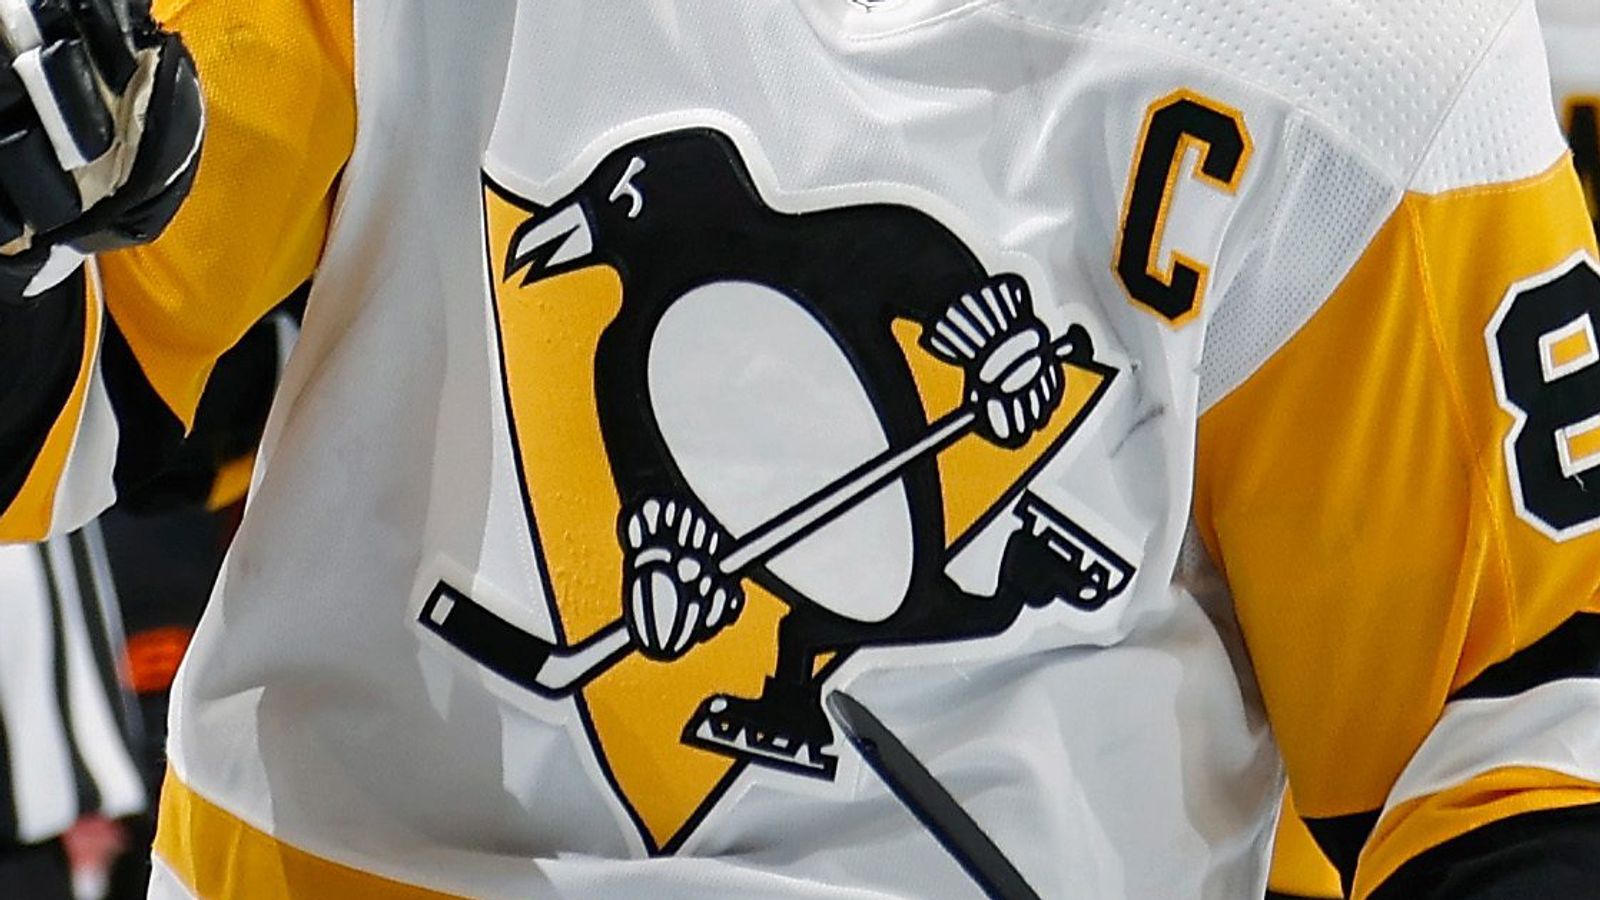 Penguins jersey concept inspired by the Steelers jersey : r/penguins